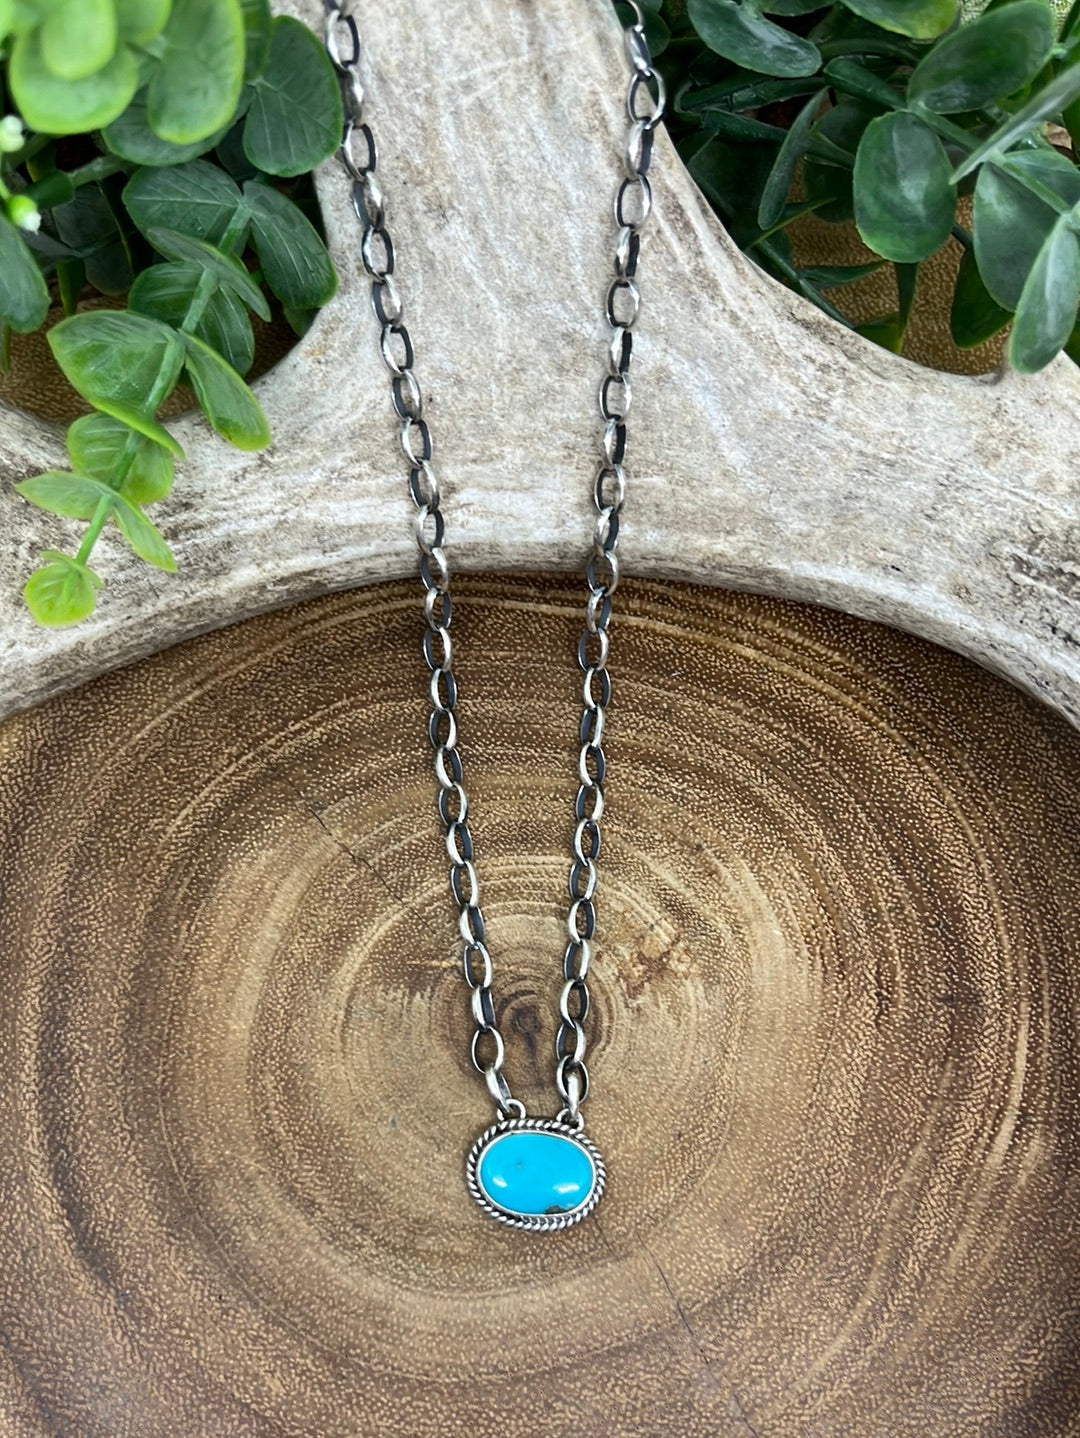 Exclusive Sterling Link Chain Necklace With Oval Roped Turquoise Pendant